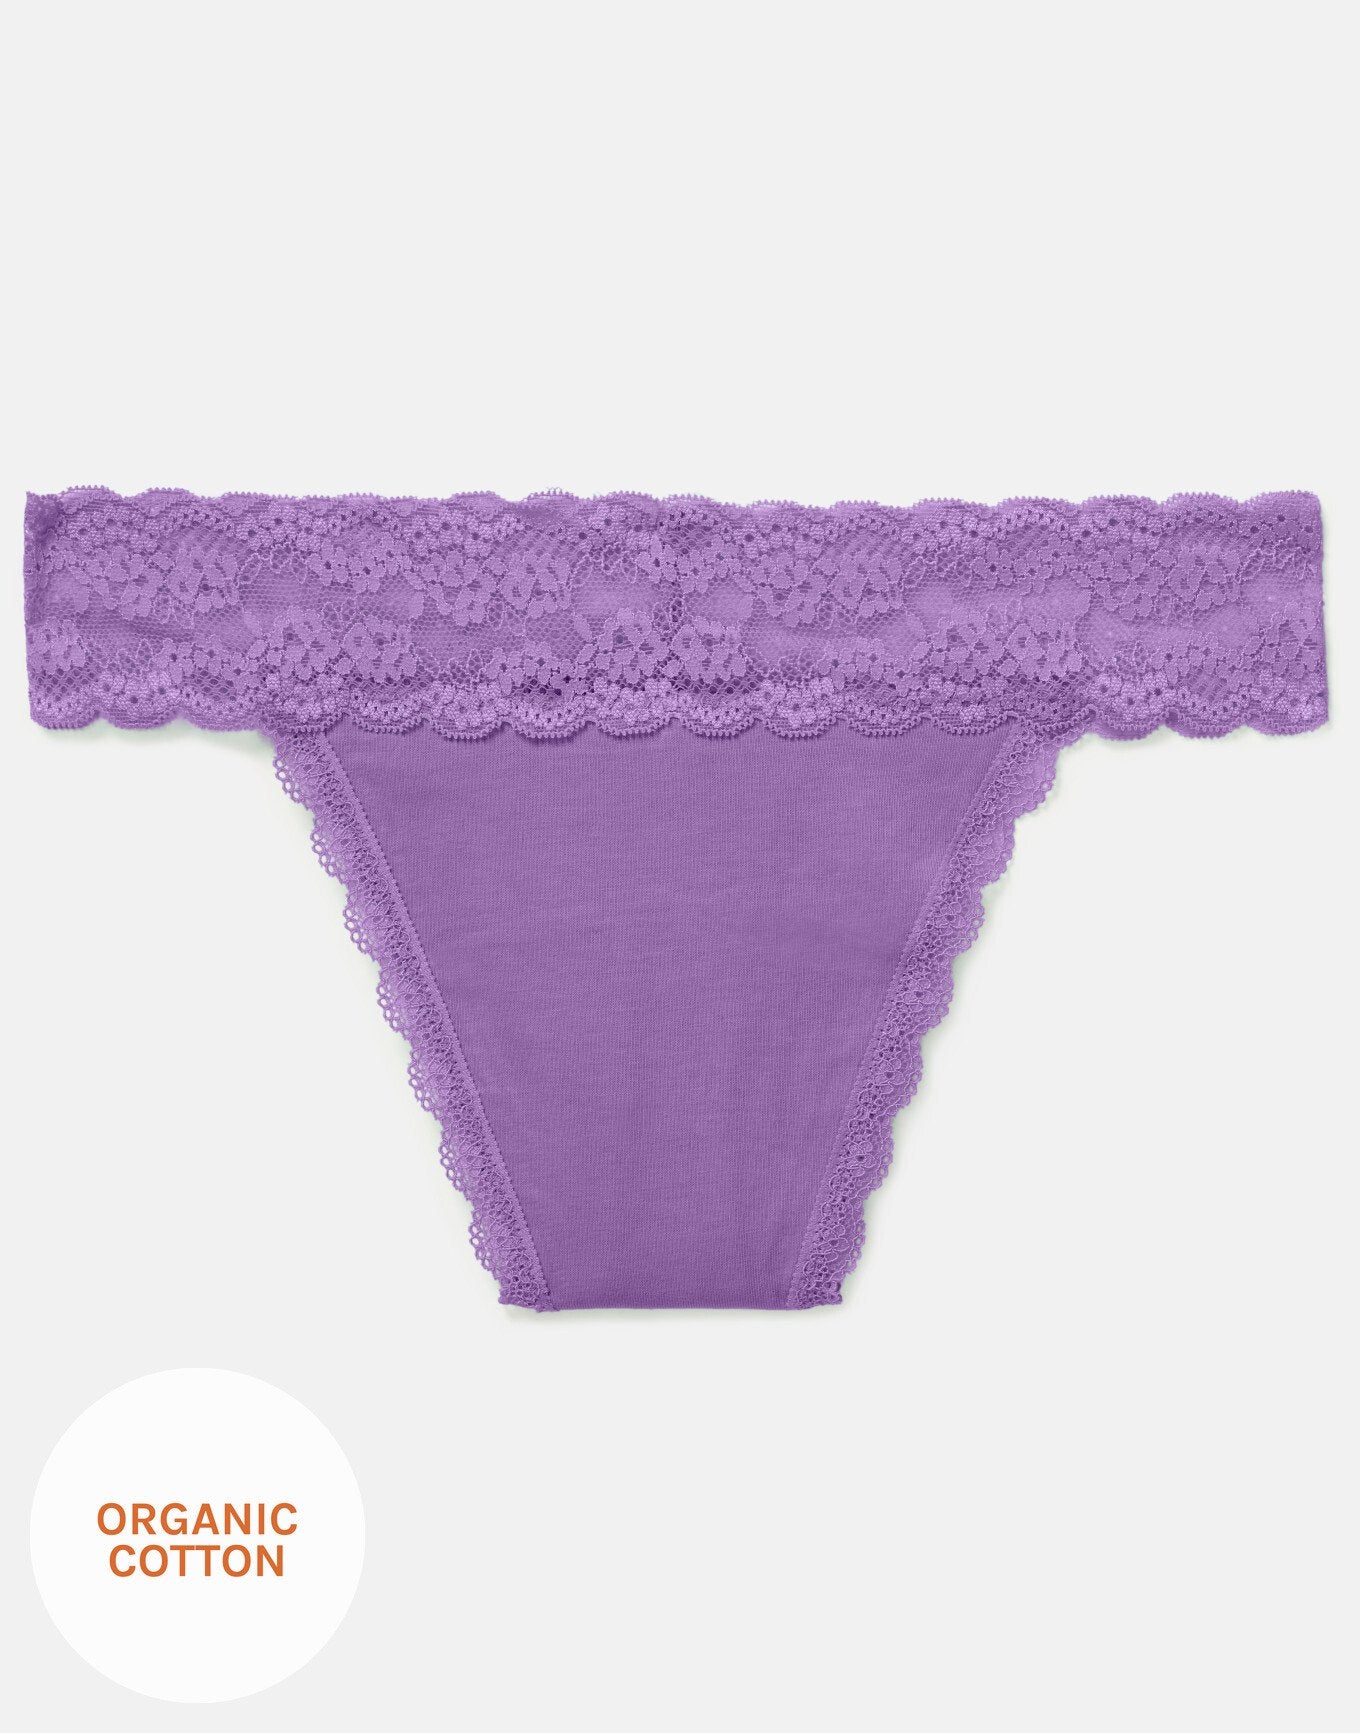 Joyja Lily period-proof panty in color Amethyst Orchid and shape thong